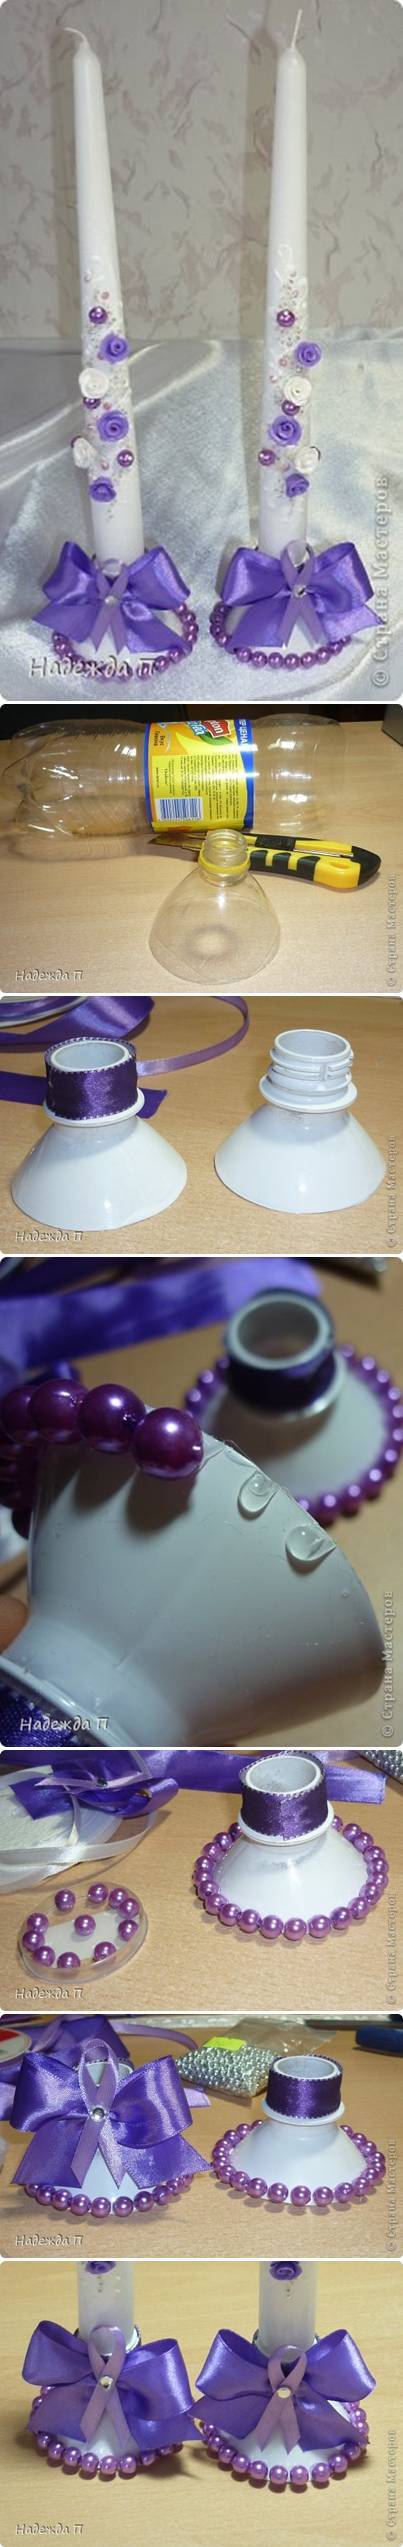 DIY Beautiful Candle Holder from Plastic Bottle